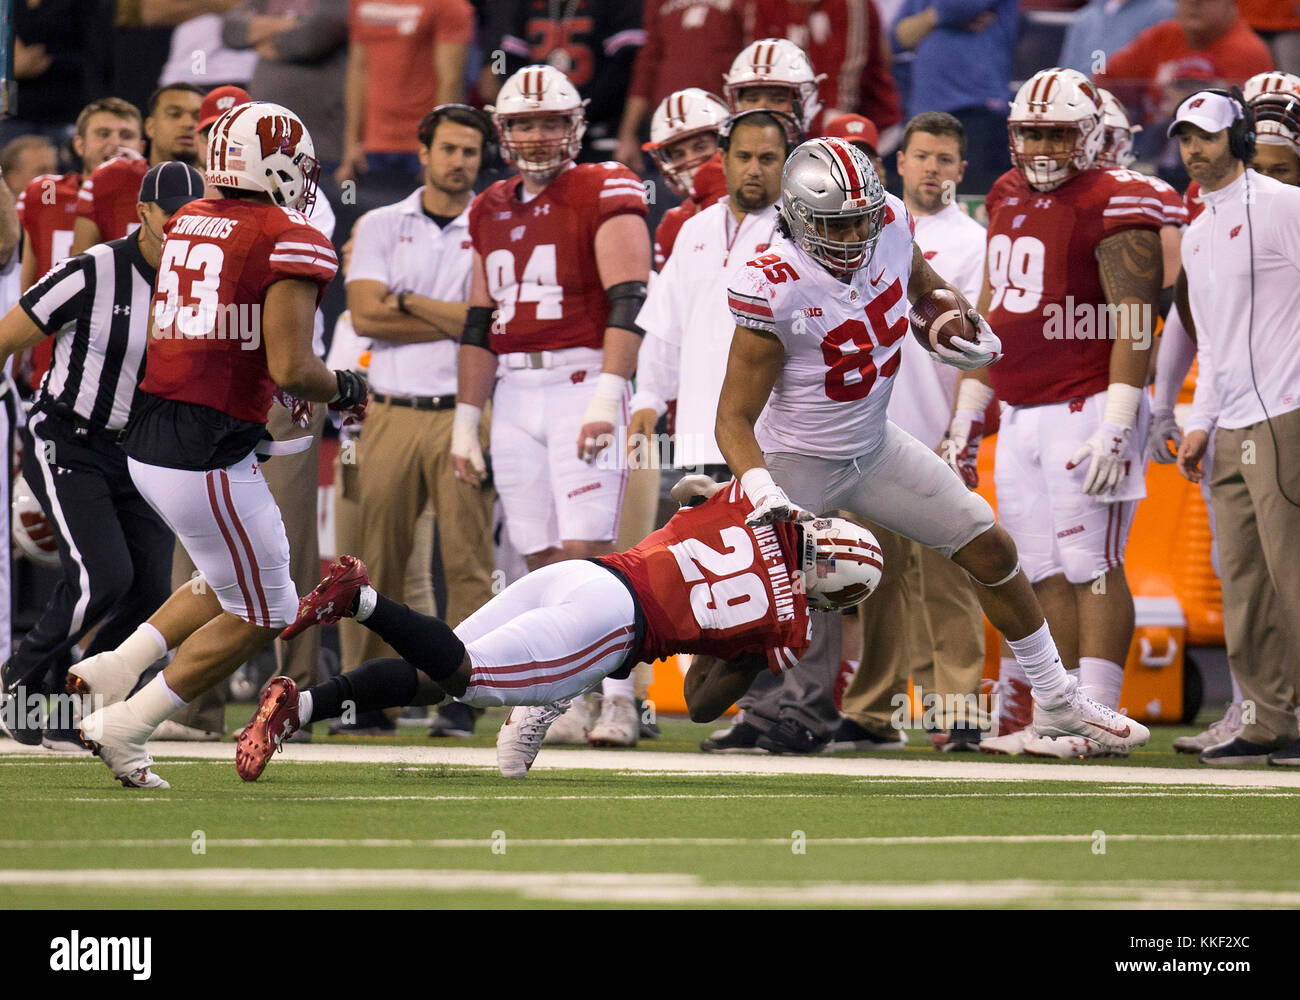 Indianapolis, Indiana, USA. 02nd Dec, 2017. Ohio State tight end Marcus Baugh (85) runs with the ball after the catch as Wisconsin defensive back Dontye Carriere-Williams (29) attempts to make the tackle during NCAA Football game action between the Ohio State Buckeyes and the Wisconsin Badgers at Lucas Oil Stadium in Indianapolis, Indiana. Ohio State defeated Wisconsin 27-21. John Mersits/CSM/Alamy Live News Stock Photo